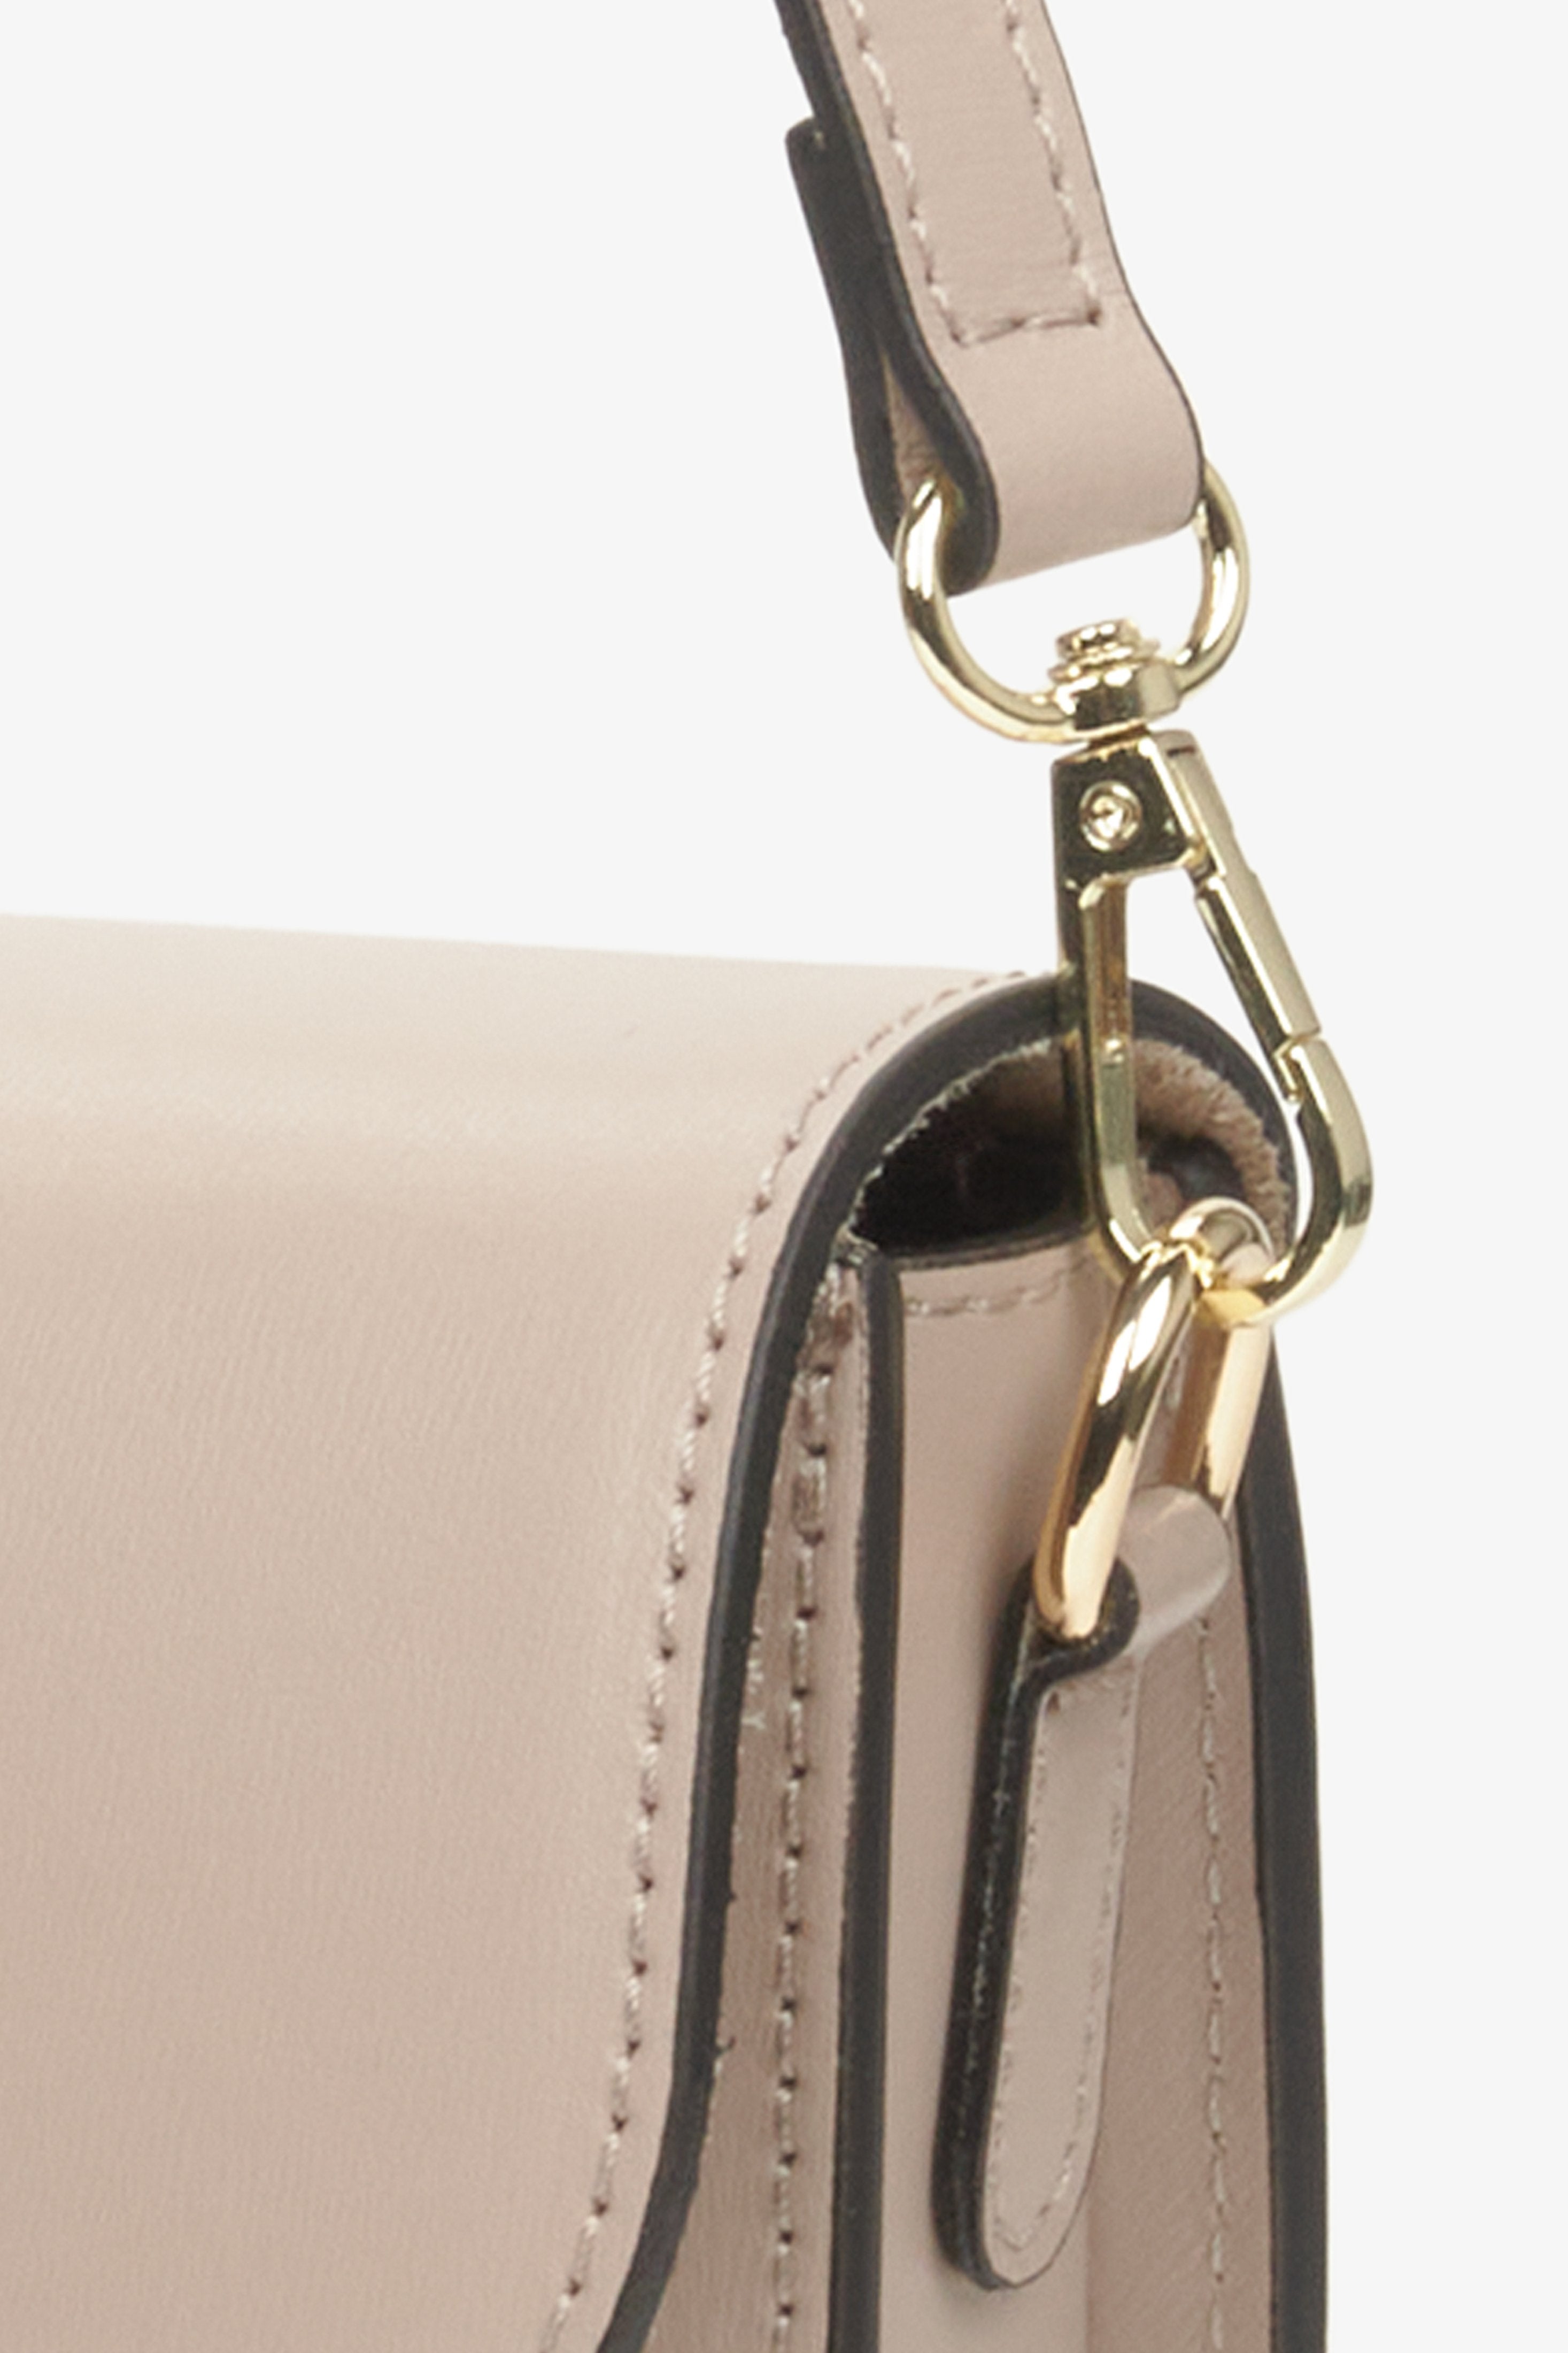 Estro women's handbag made from genuine beige leather - close-up of the fastening system.